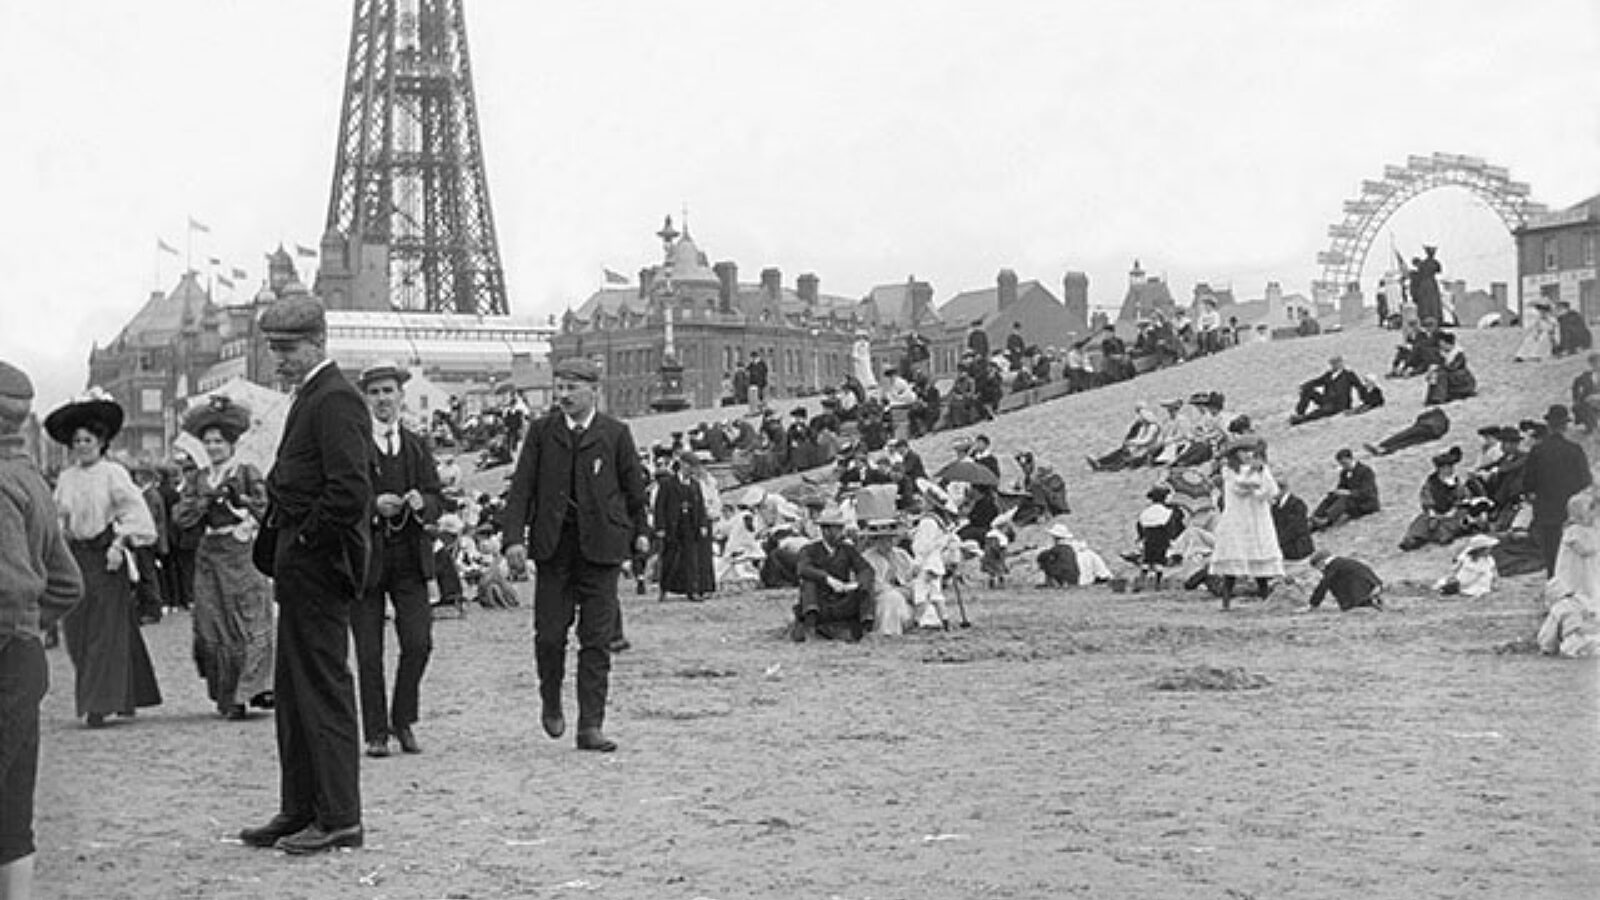 A black and white image with well dressed people walking on the beach